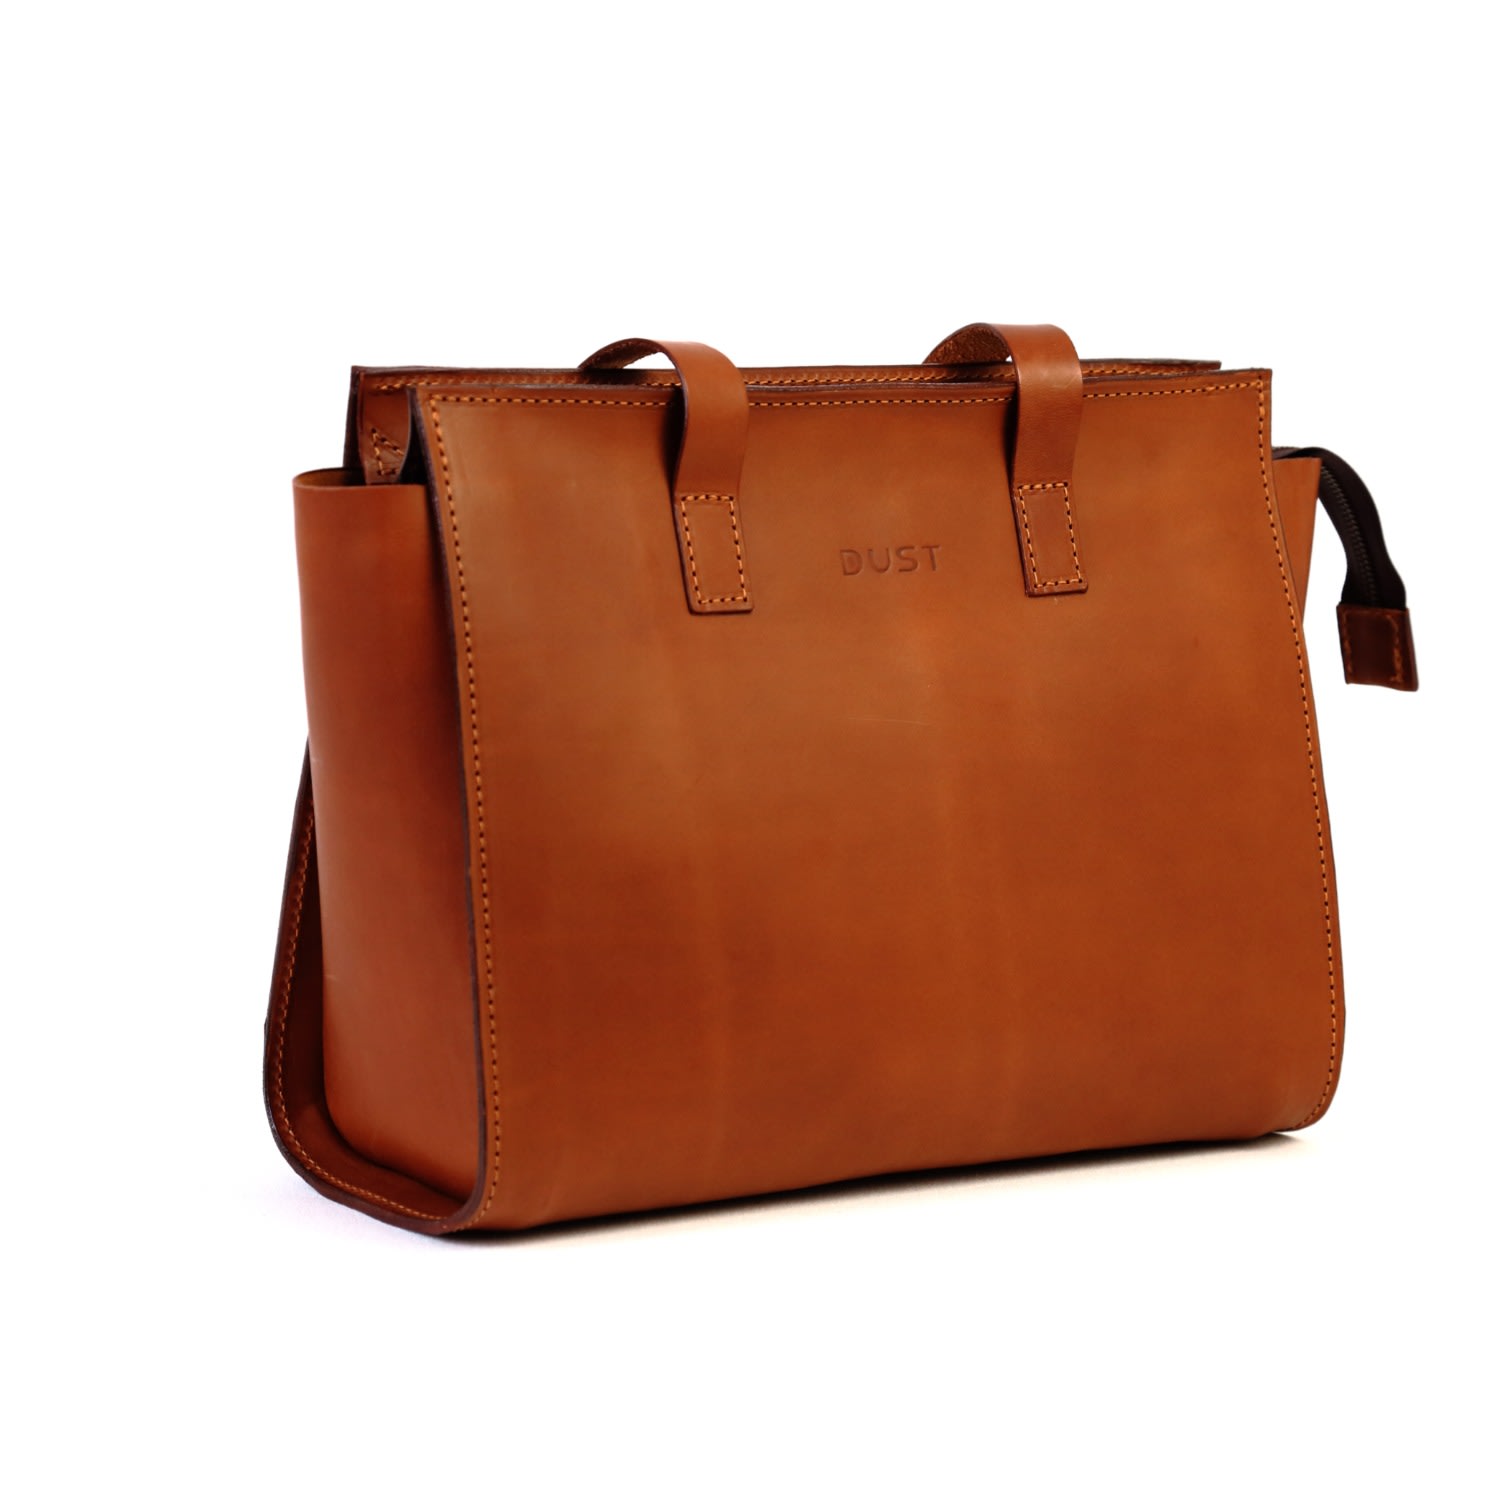 The Dust Company Women's Leather Shoulder Bag In Cuoio Brown